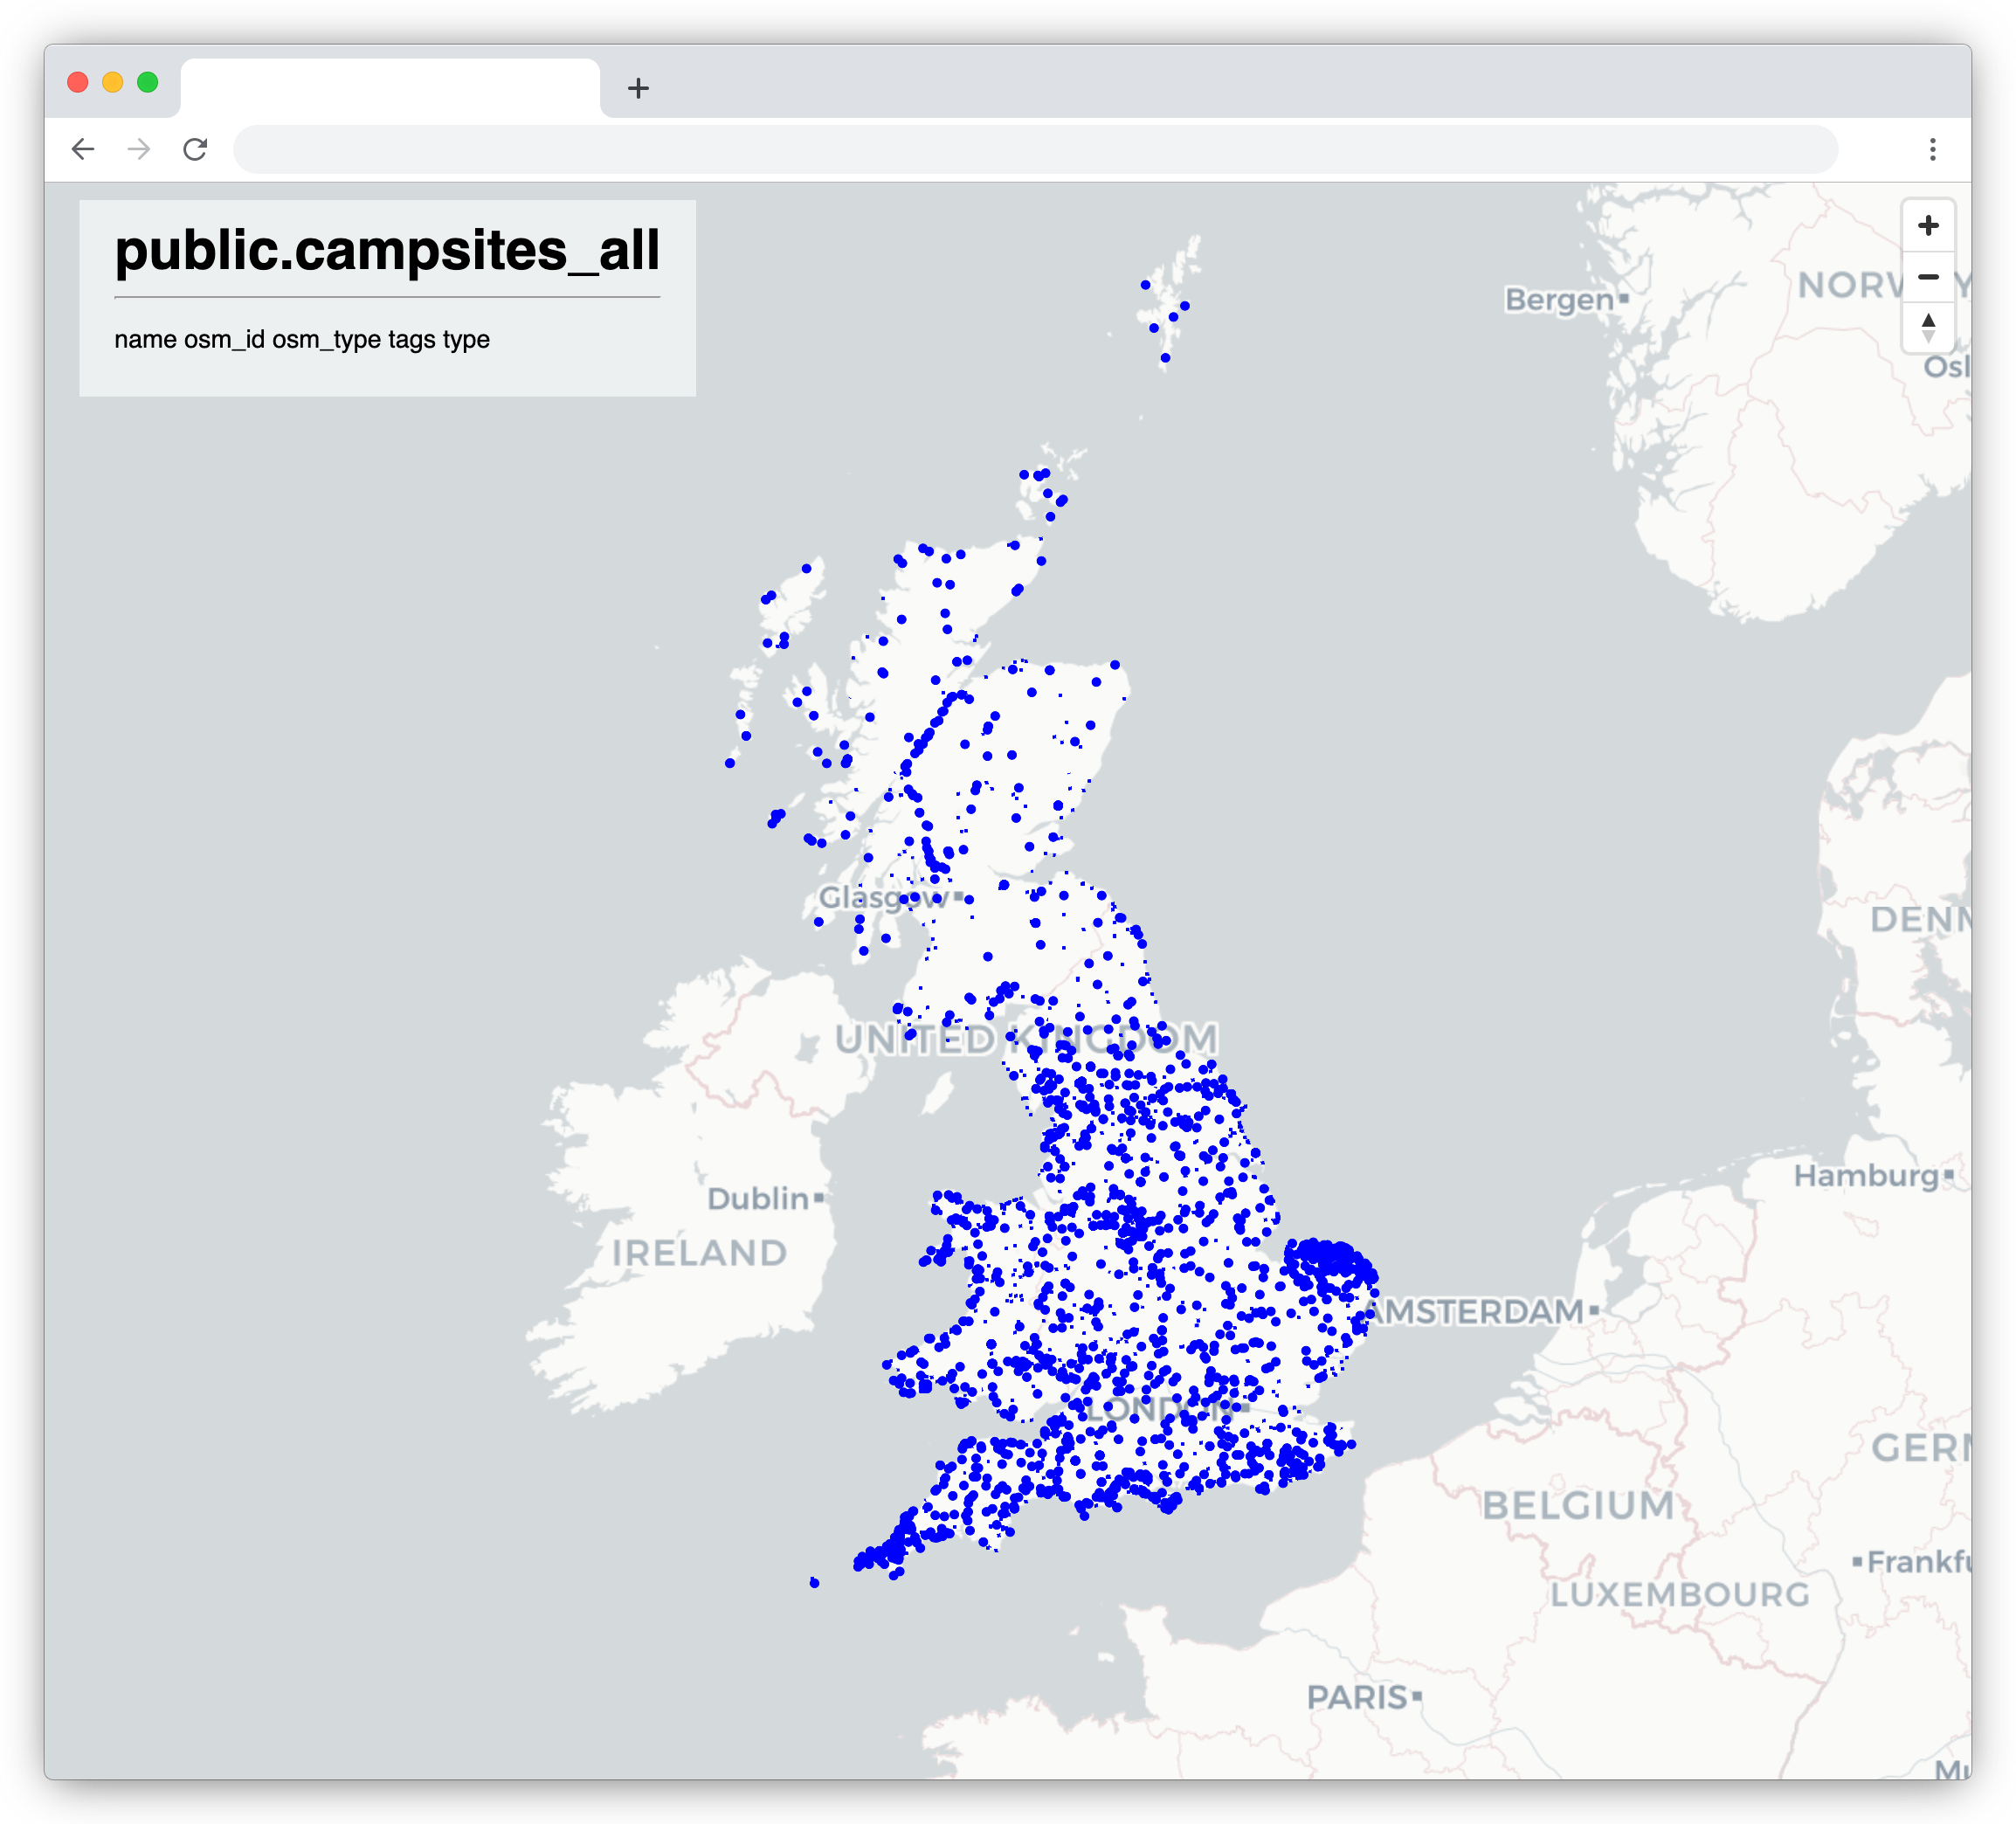 A screenshot of a browser, showing a map of the UK with blue highlights indicating all the known campsites